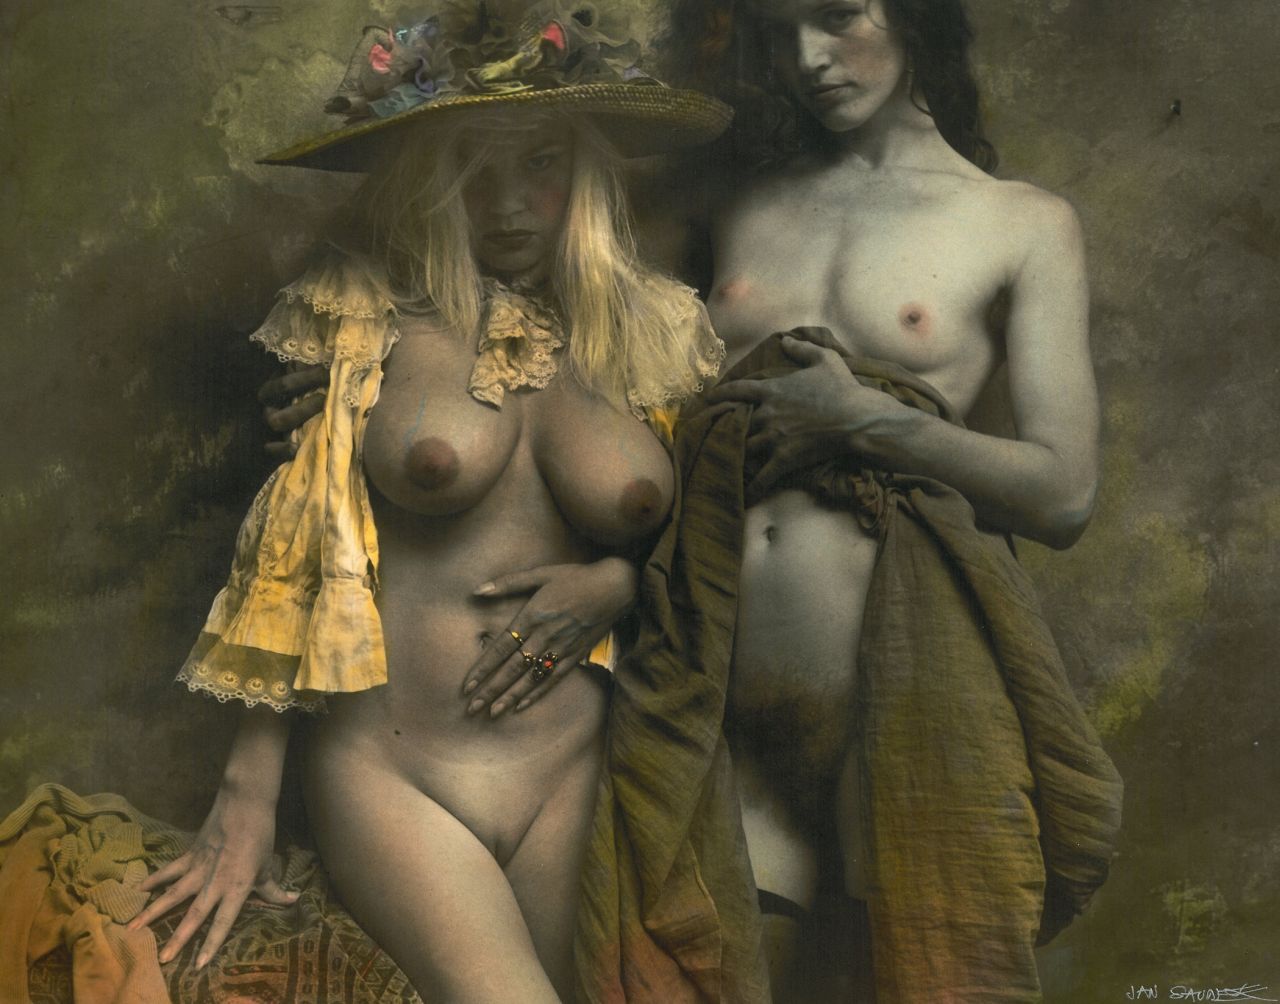 Saudek J.  | Jan Saudek | Prints and Multiples offered for sale | Women of All Kinds: Czechoslovakia, photo, silver gelatin print, hand colored 29.7 x 40.0 cm, signed l.r. and executed ca. 1992